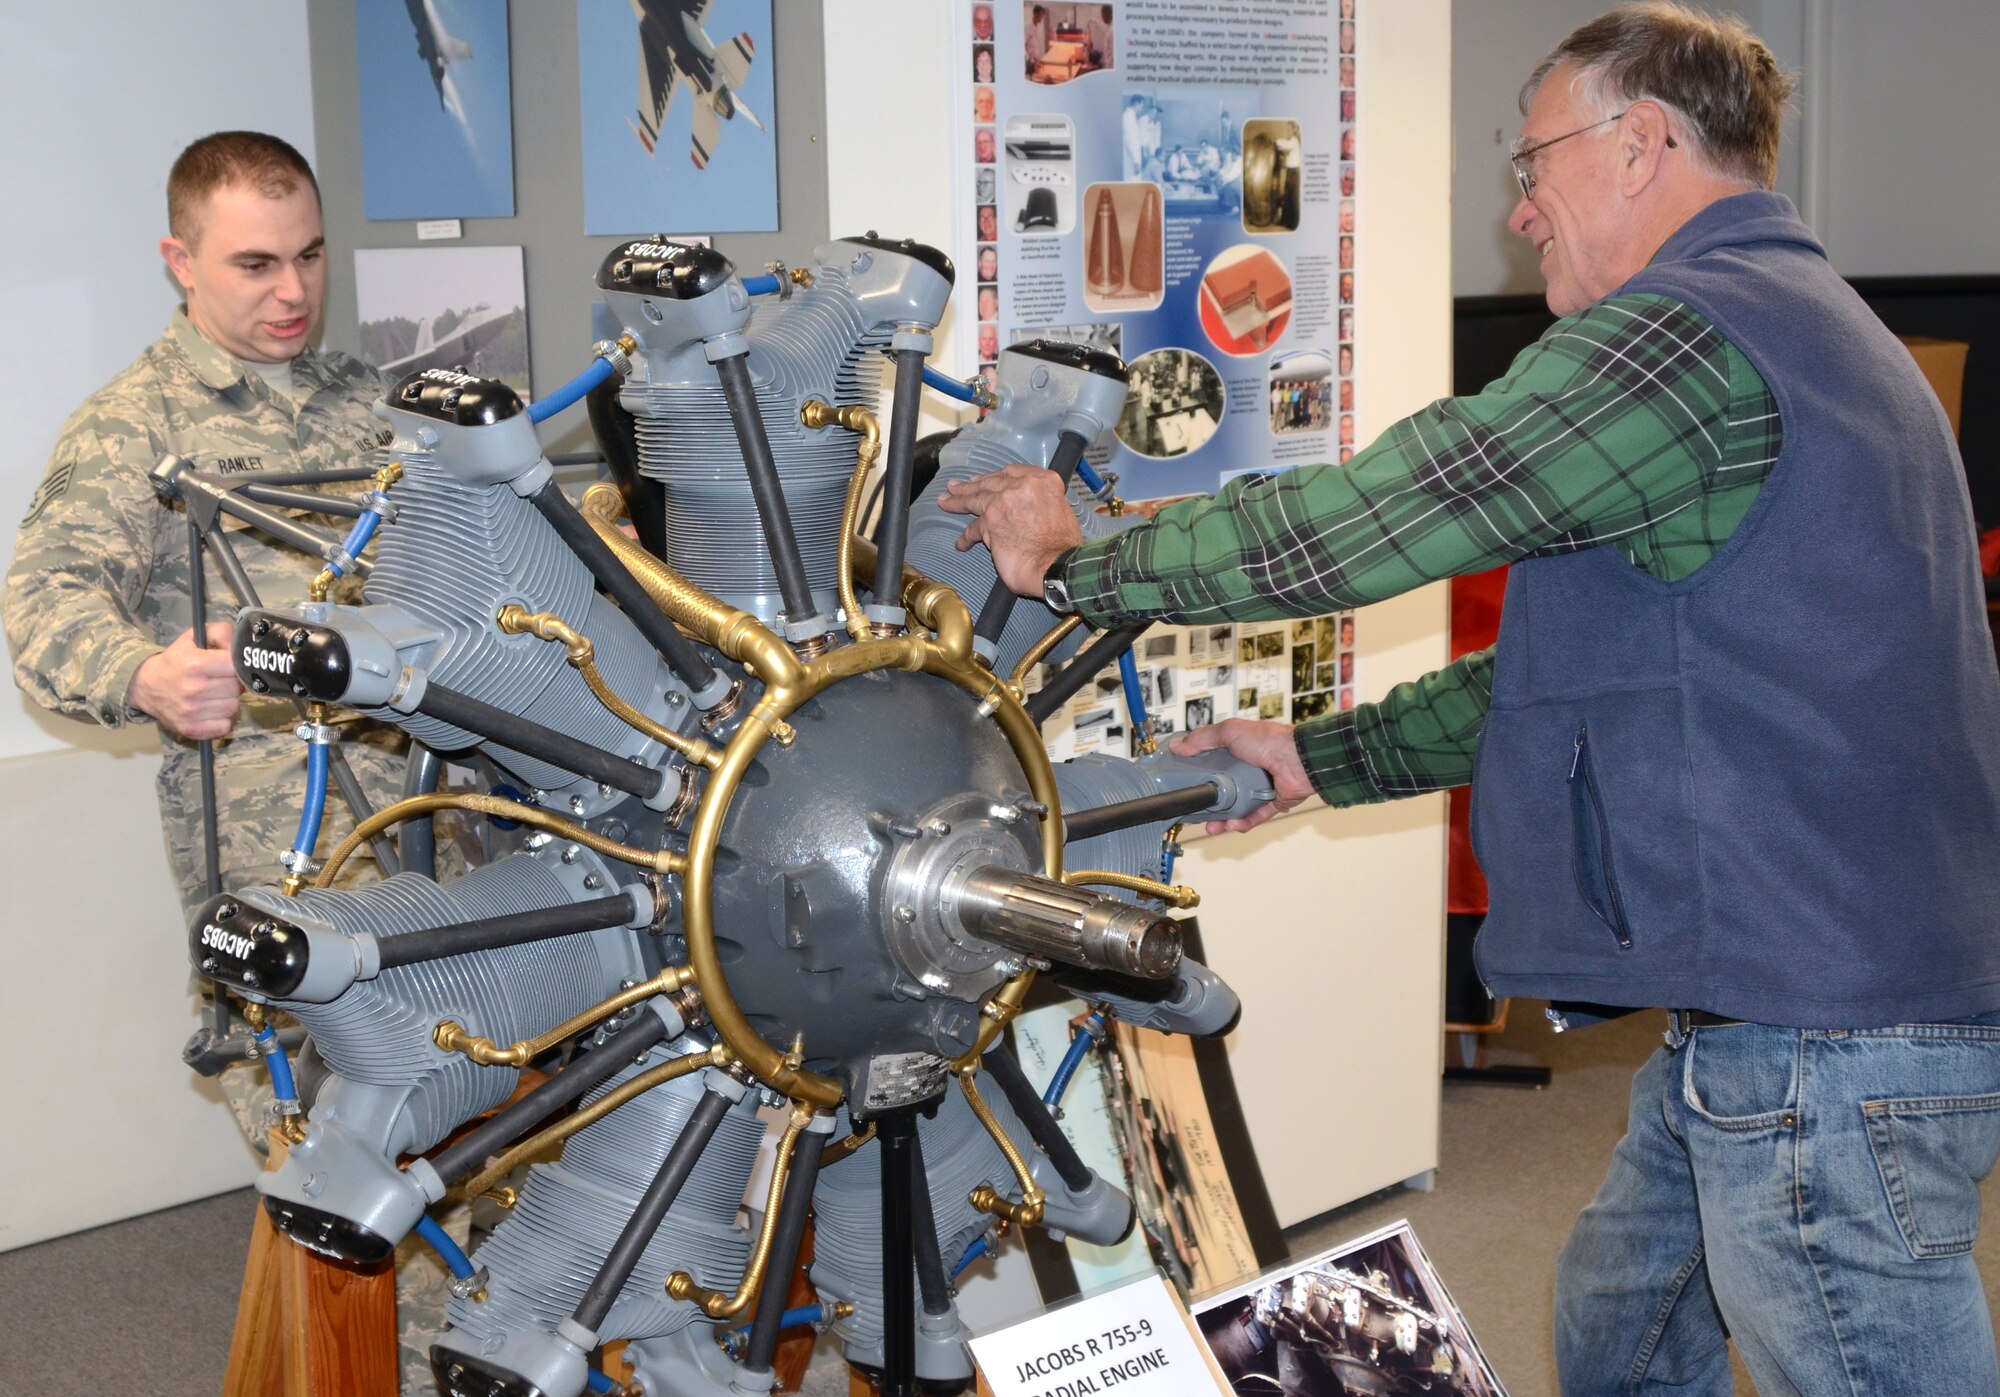 Staff Sgt. Dave Ranlet, 175th Logistic Readiness Squadron, and Ted Cooper, director of operations for the Glenn L. Martin Maryland Aviation Museum in Middle River, Md., push a display engine into position in the museum.  Ranlet volunteers his off- duty time restoring planes displayed in the museum.  (U.S. Air National Guard photo by Tech. Sgt. David Speicher/RELEASED)